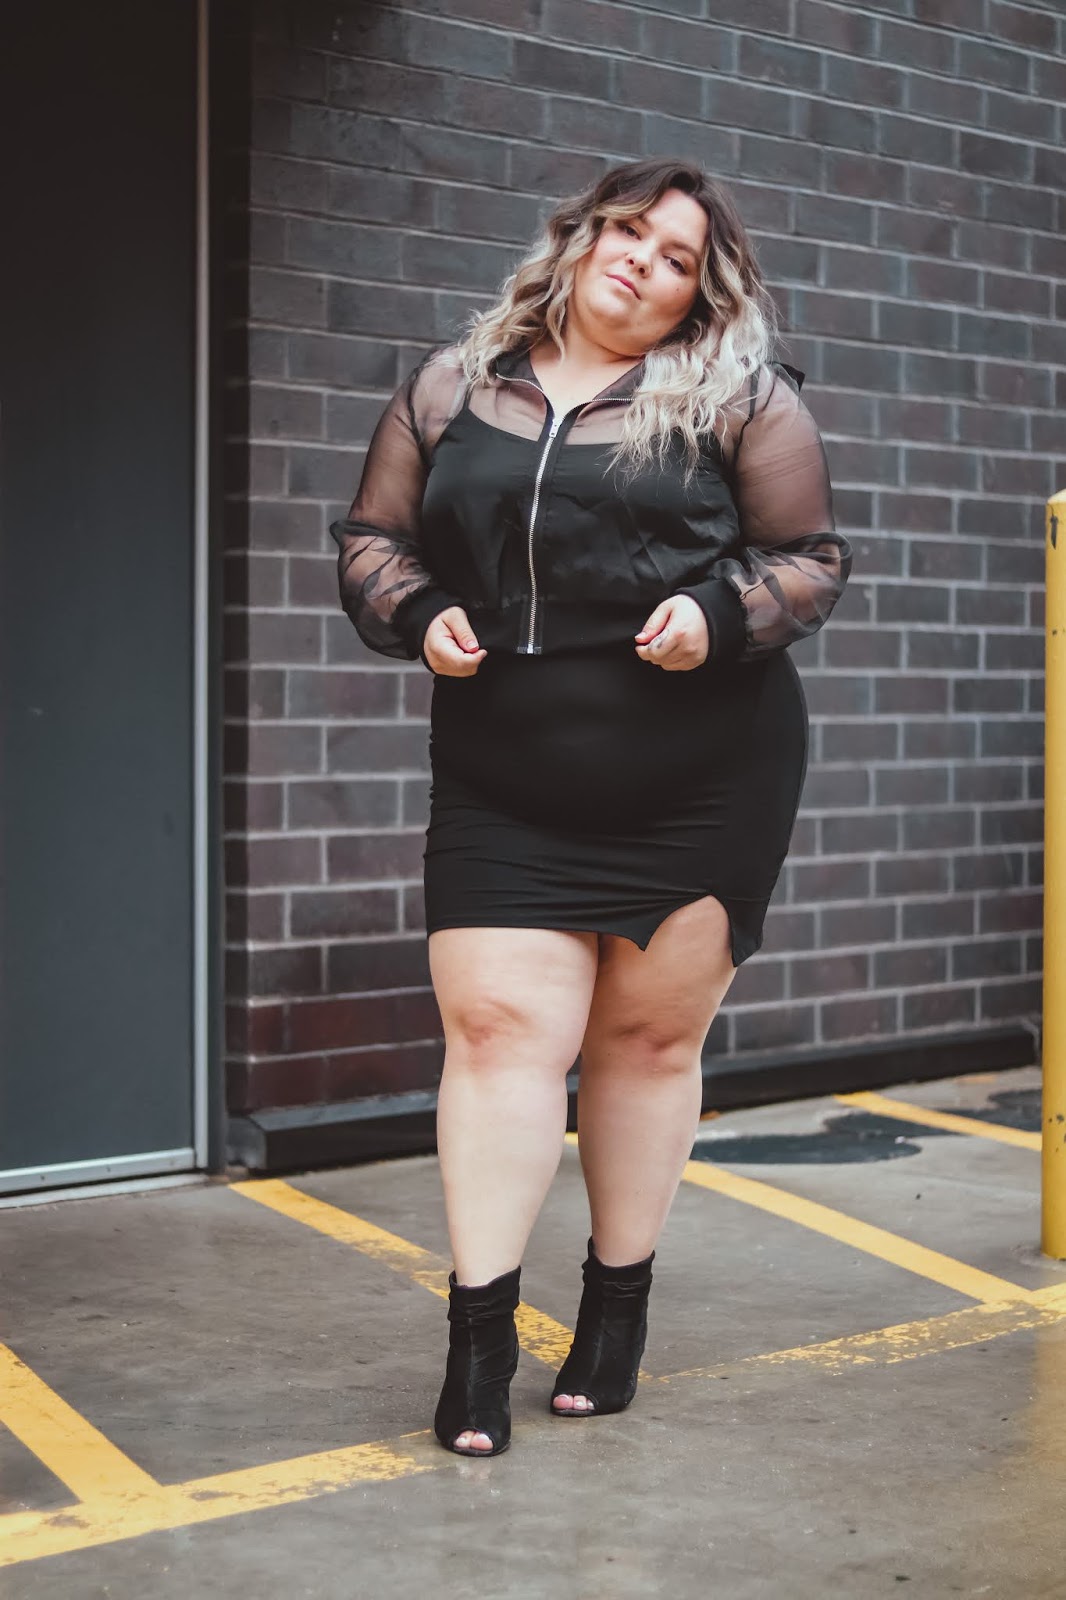 Chicago Plus Size Petite Fashion Blogger Natalie in the City reviews Forever 21's plus size clothing.